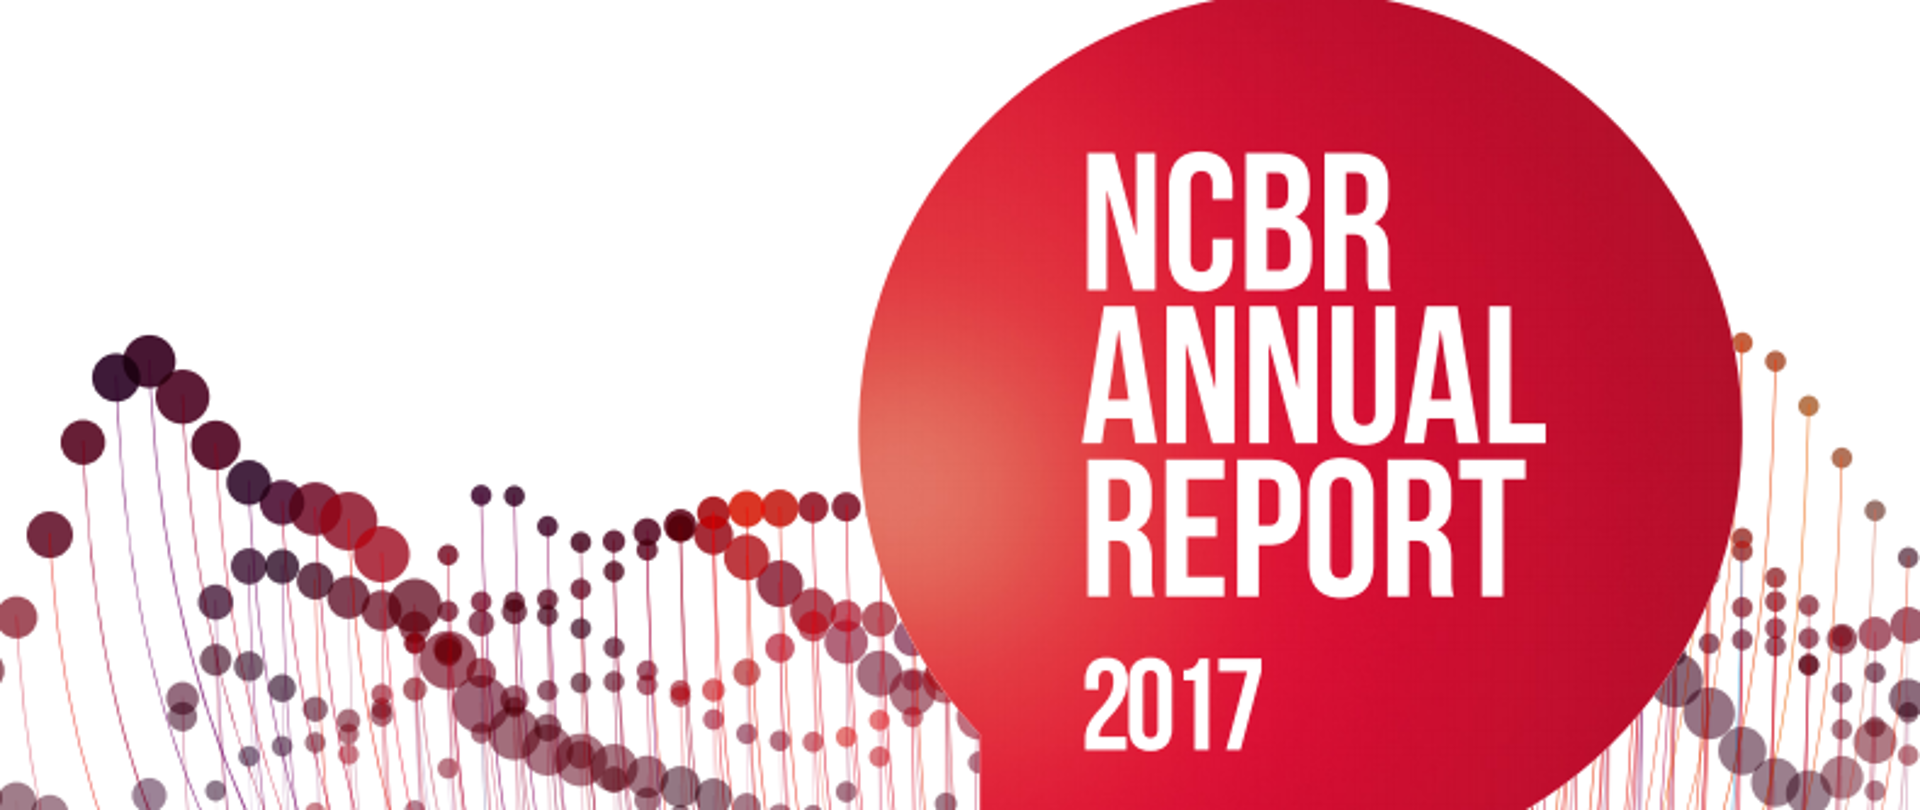 The inscription NCBR Annual Report 2017 on a red background, underneath the NCBR logo